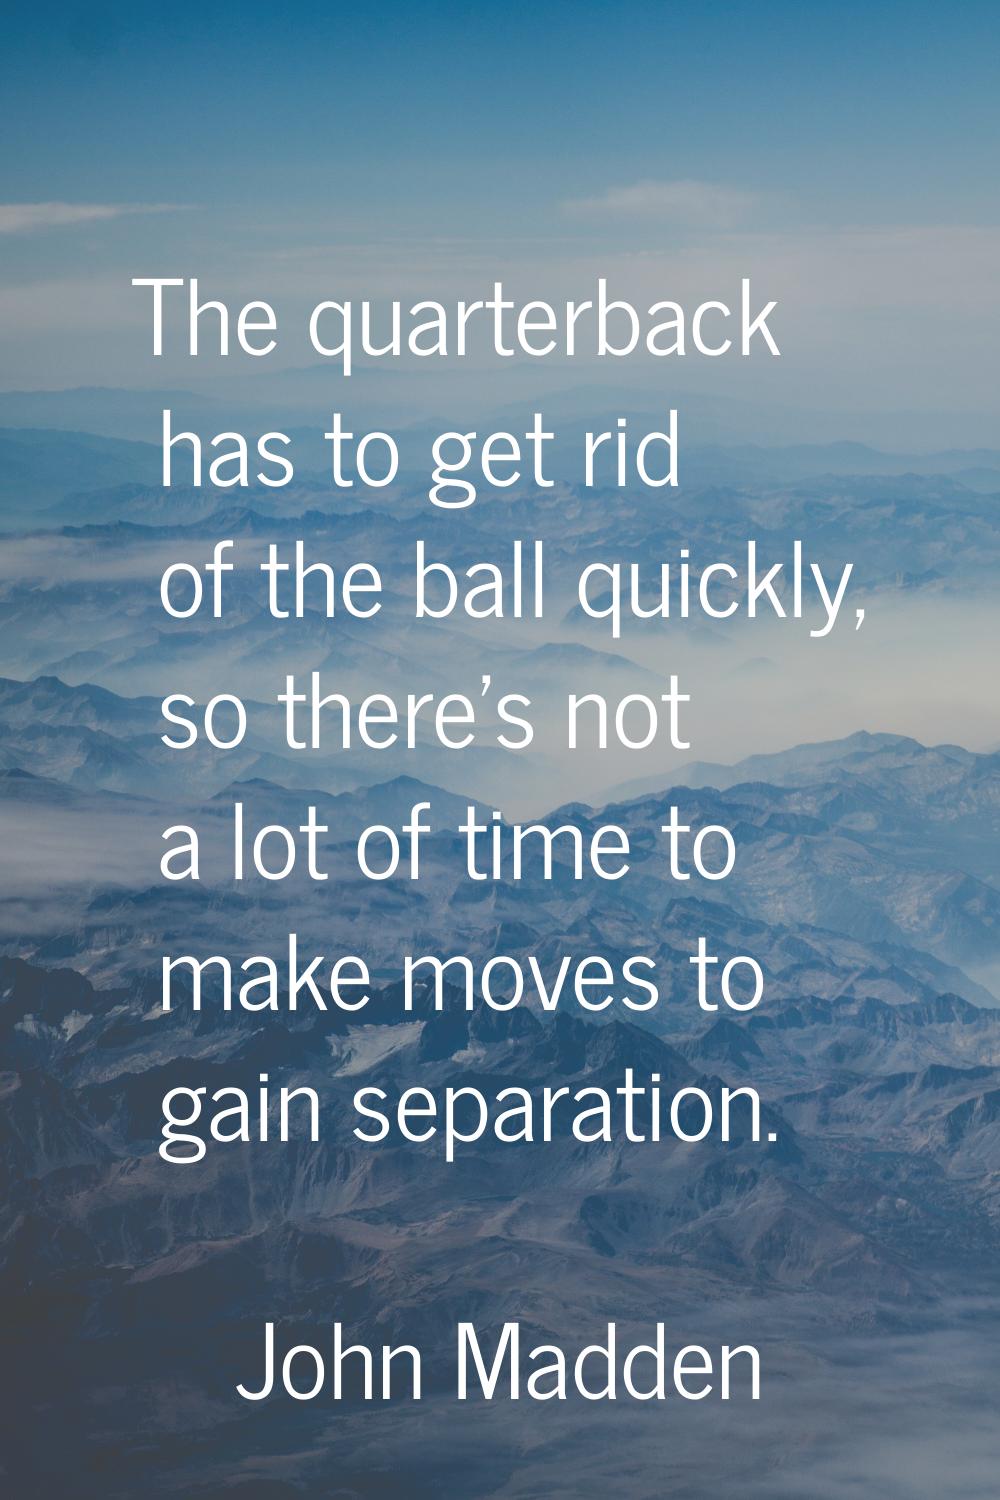 The quarterback has to get rid of the ball quickly, so there's not a lot of time to make moves to g